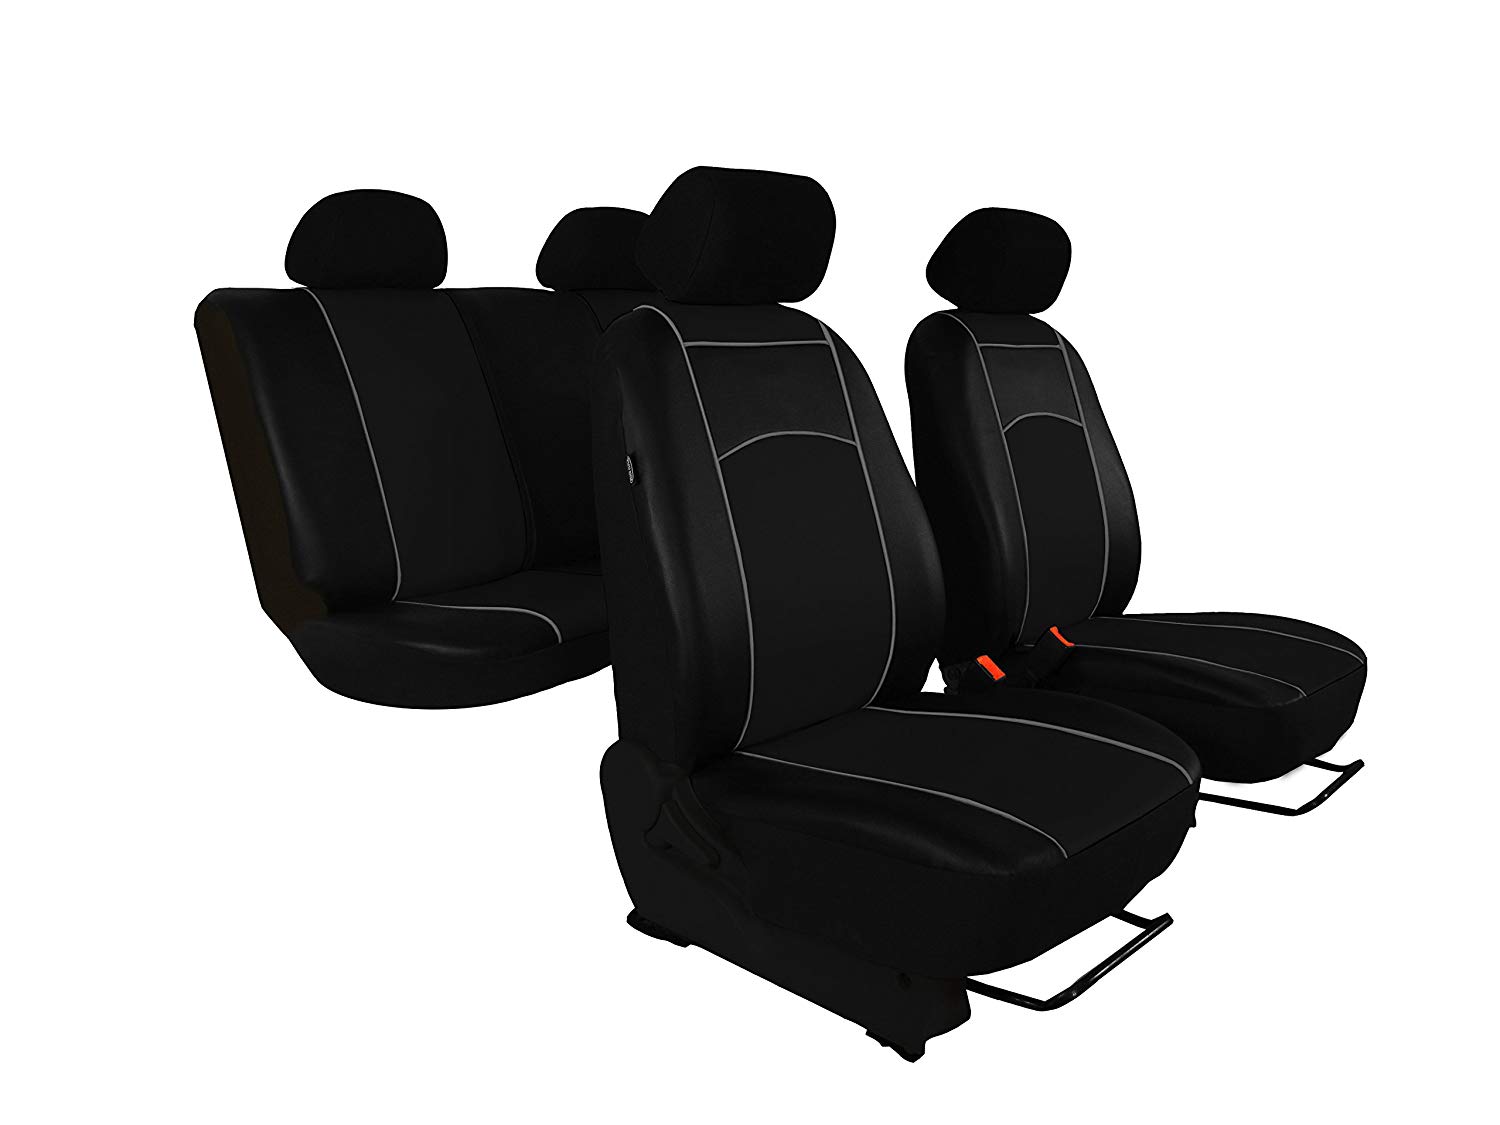 Customised Caddy 5 Seats. Design Faux Leather Black. Car Seat Cover Set